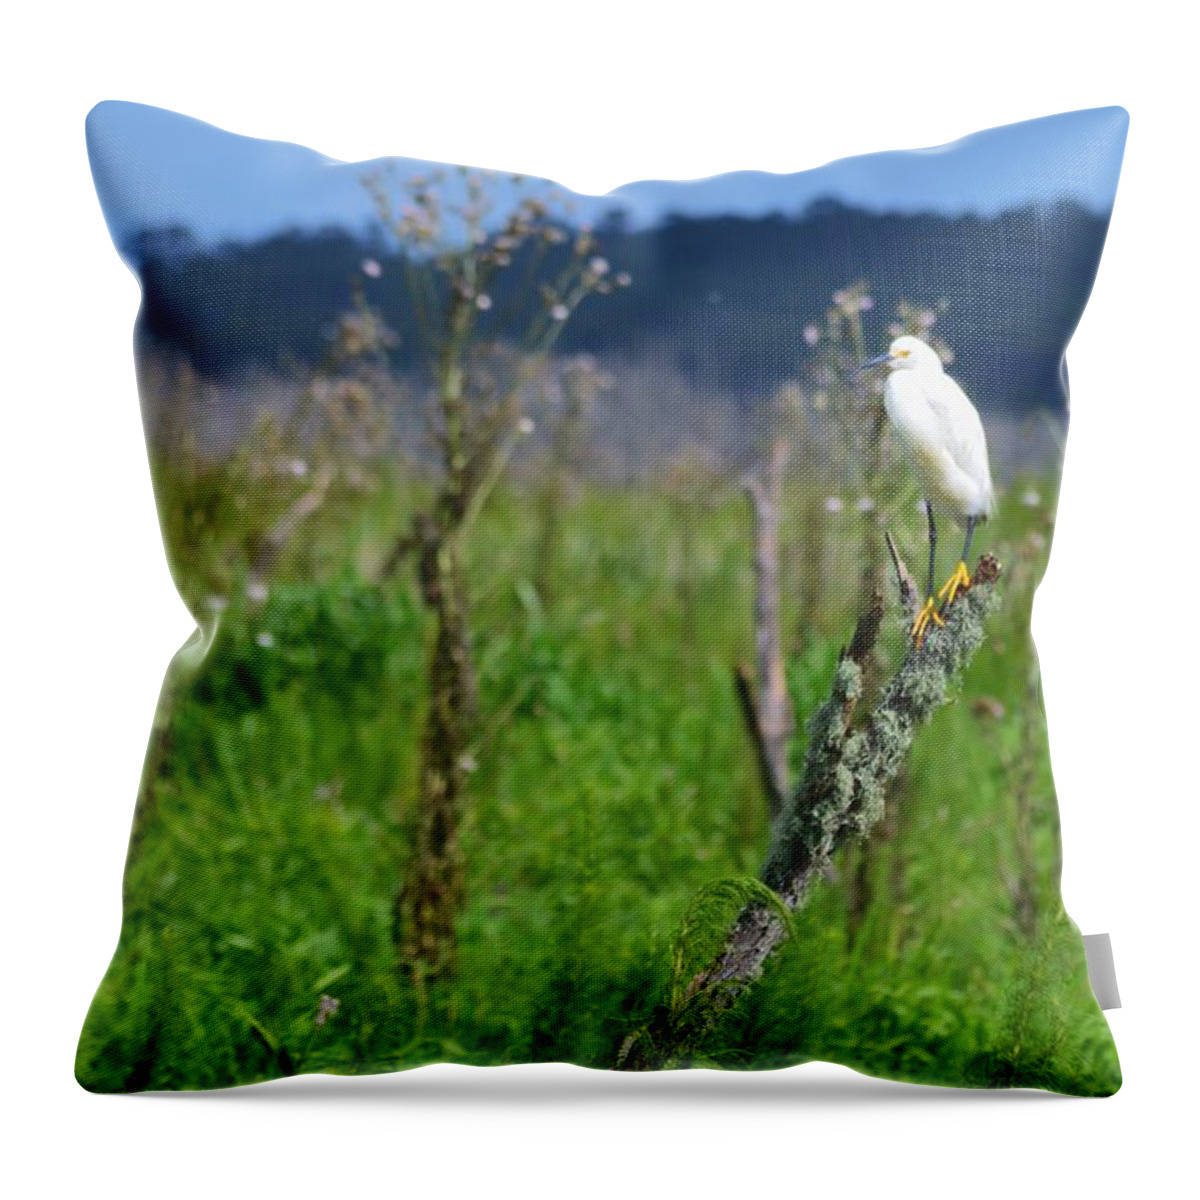 Snowy Egret Landscape Throw Pillow featuring the photograph Snowy Egret Landscape by Warren Thompson